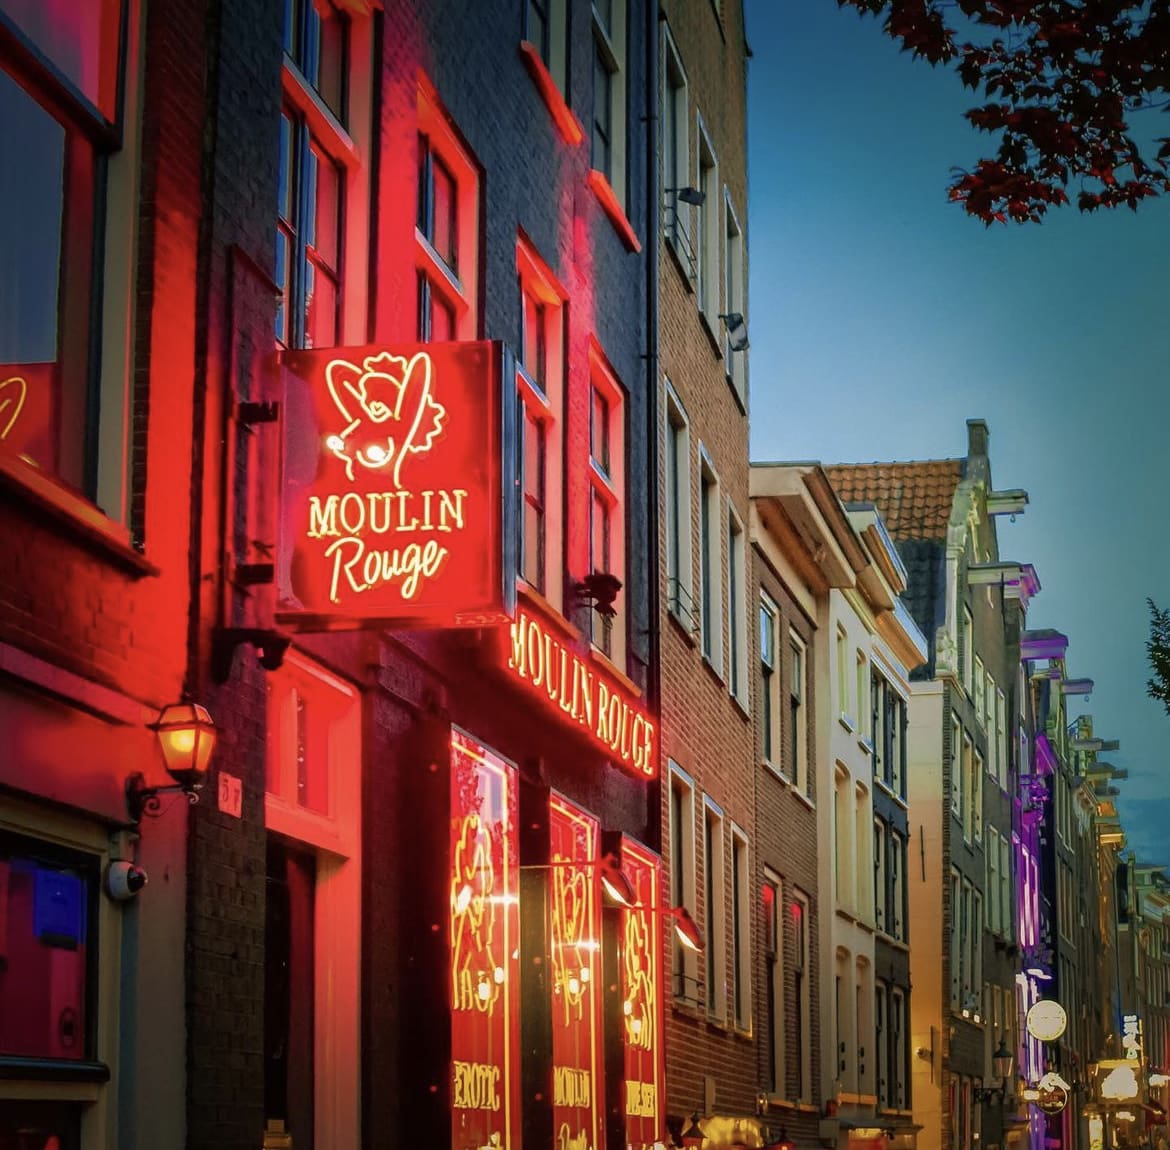 Moulin ROuge Amsterdam